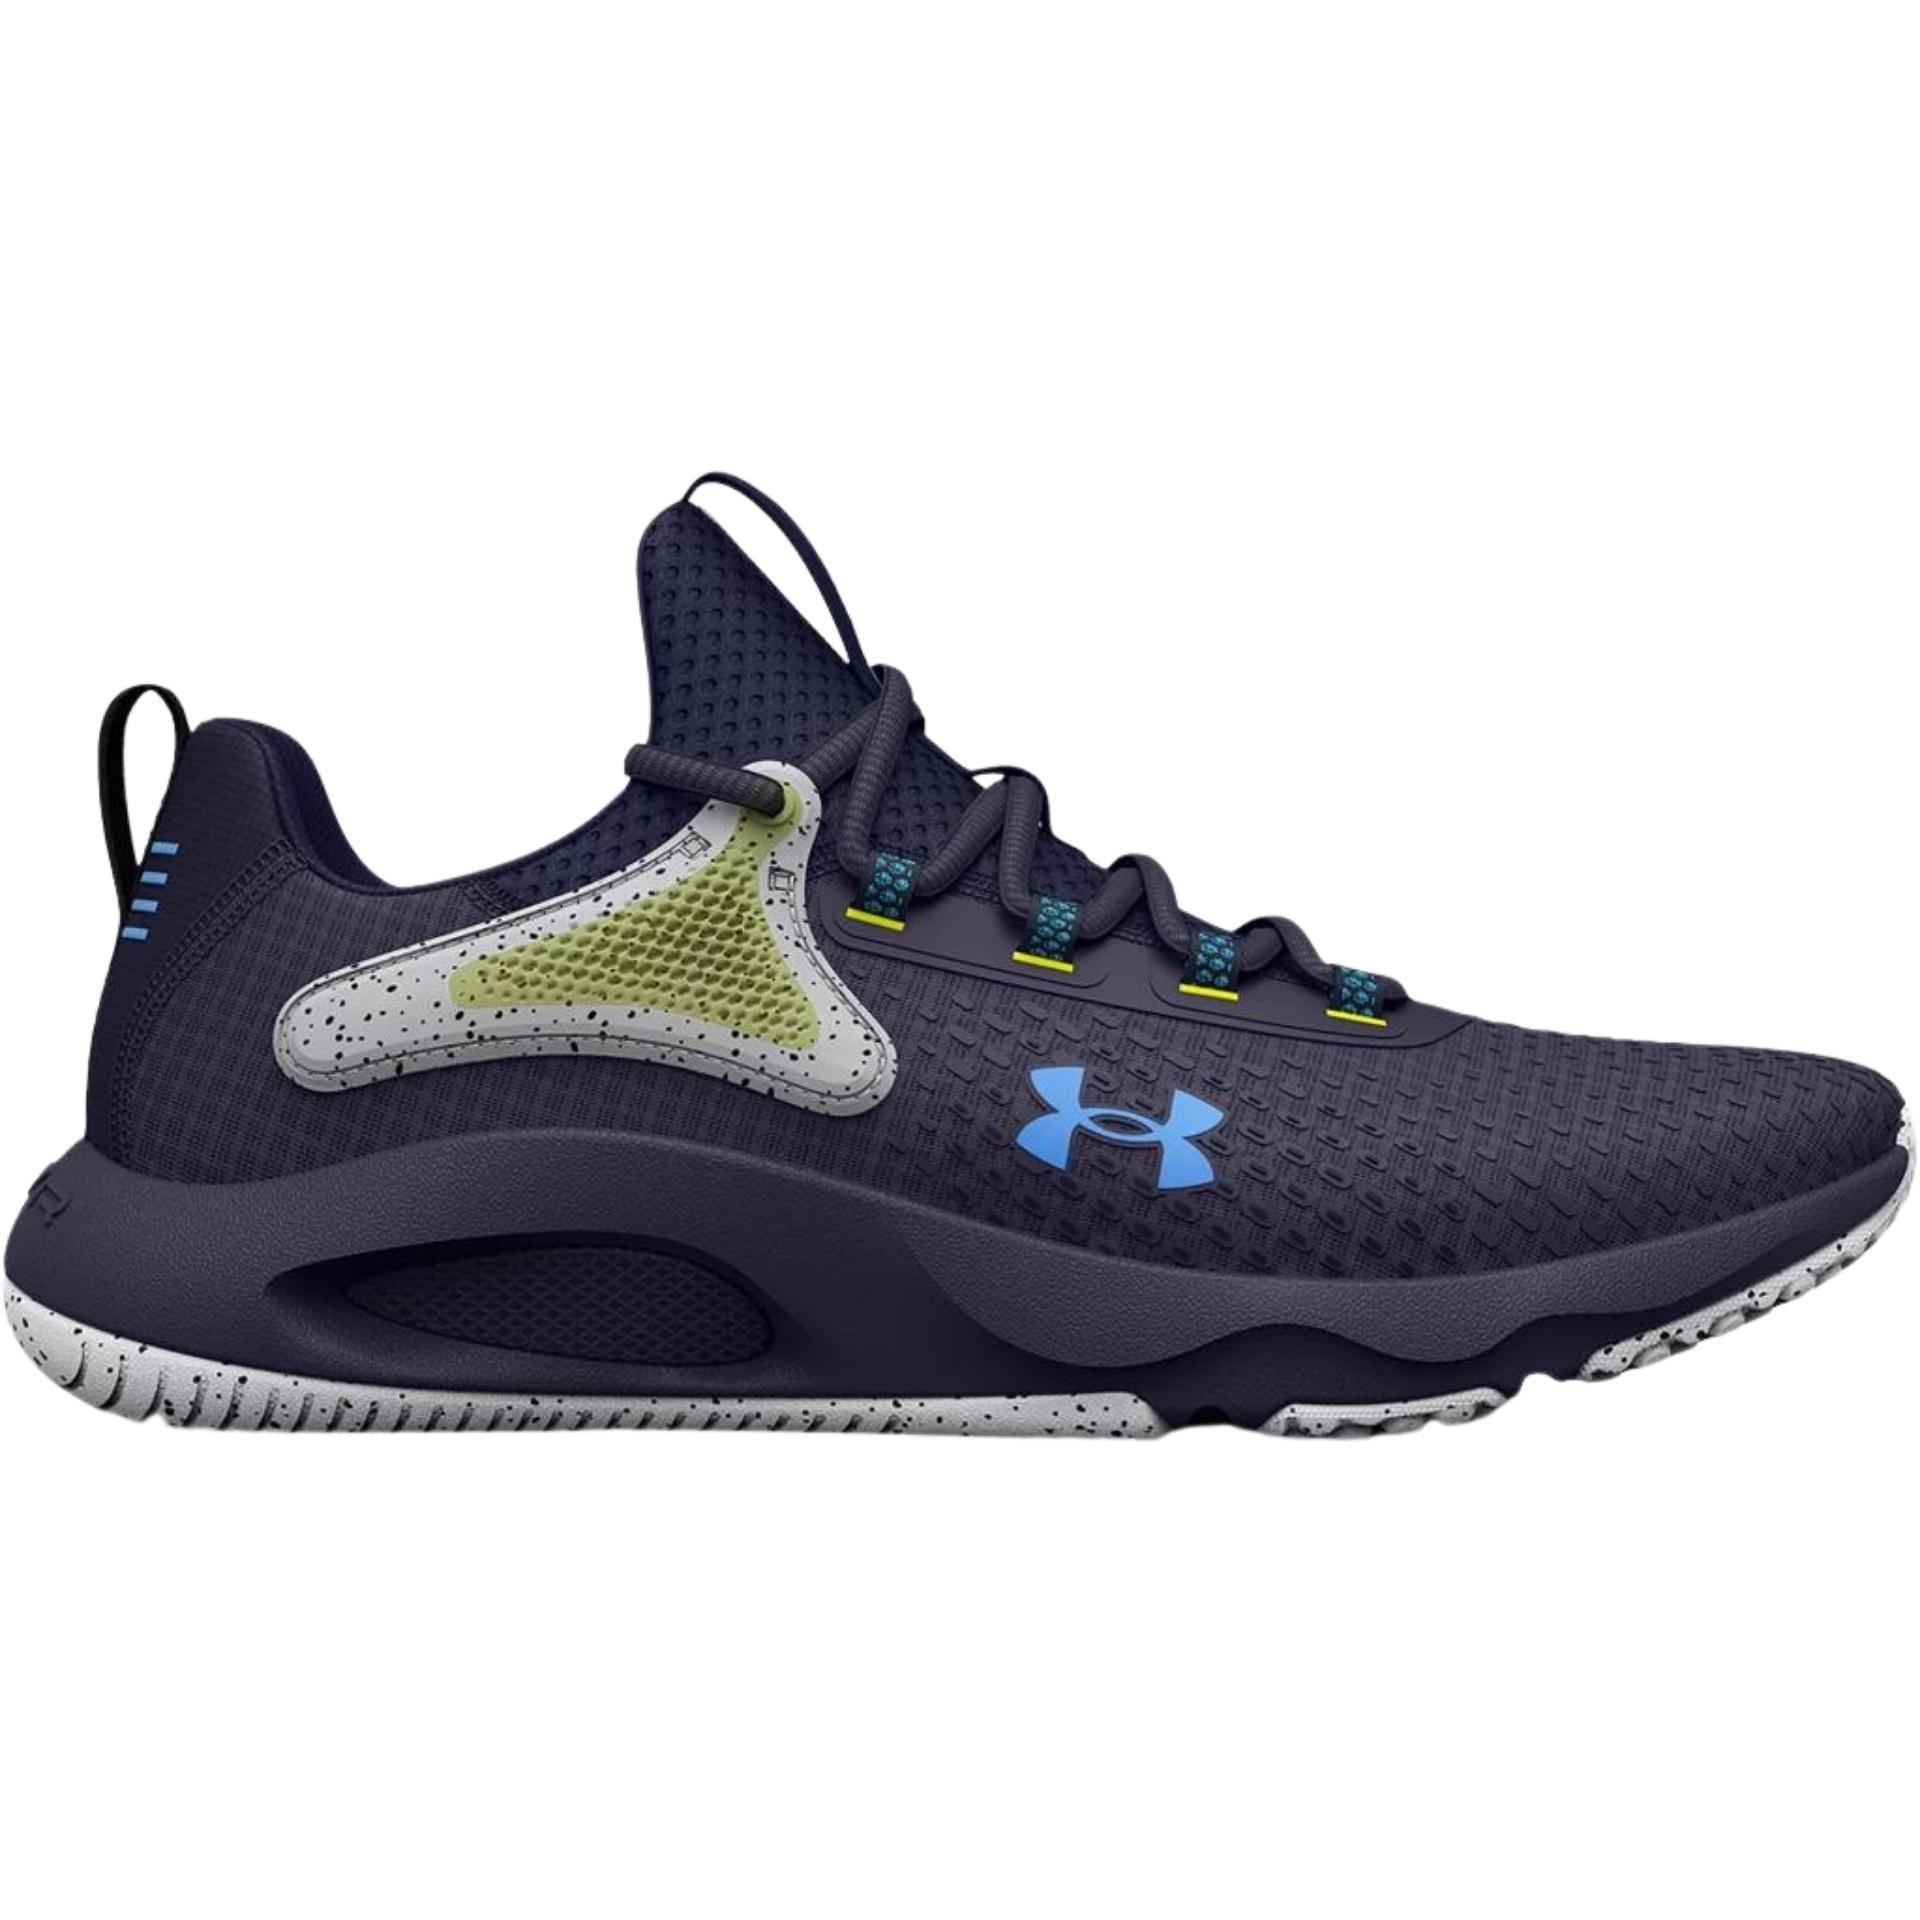 Under Armour Men's Curry HOVR 8 Black Shoes | Size 9.5